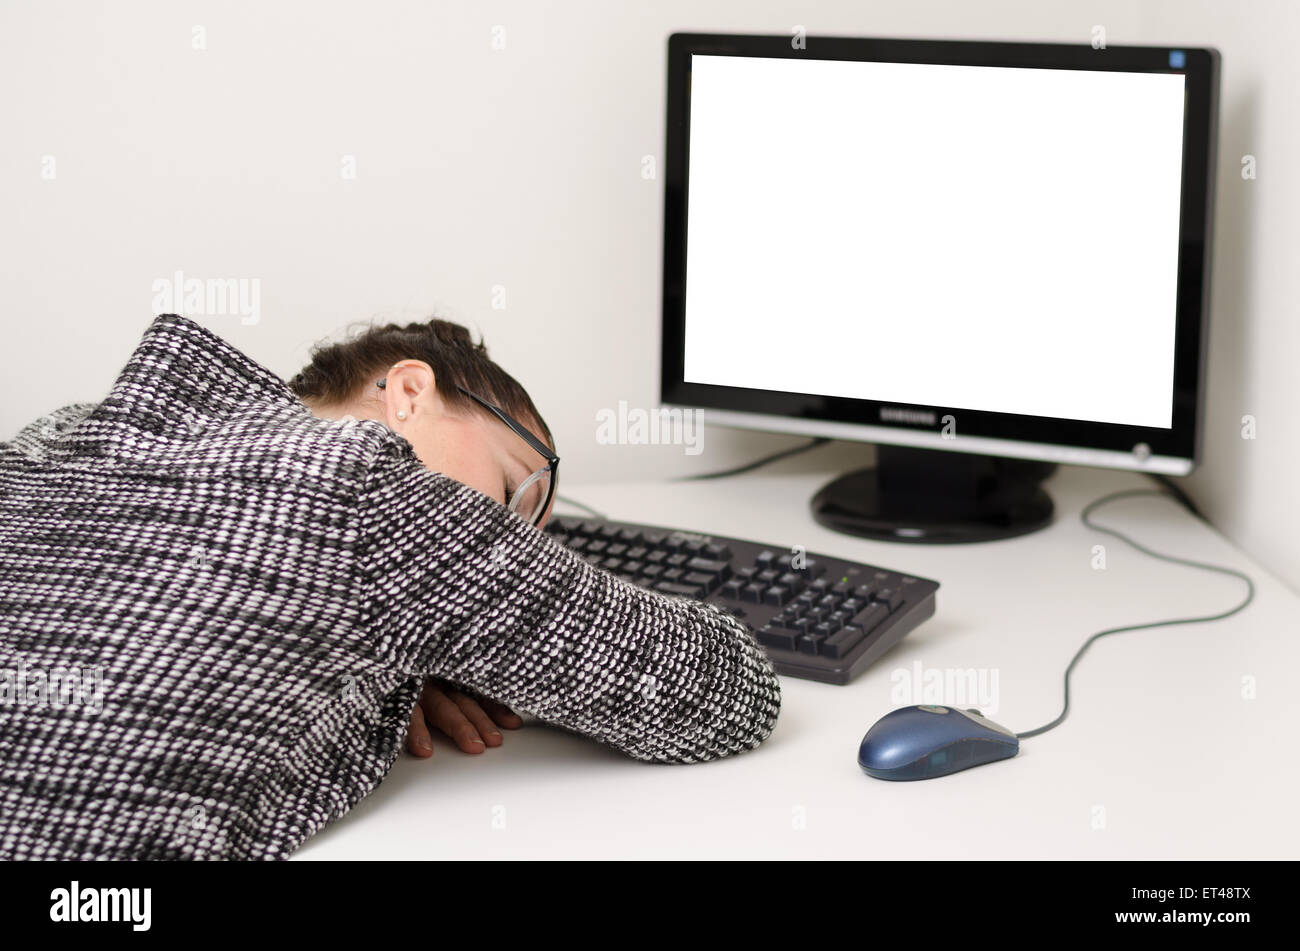 Woman Typing And Sleeping On A Computer At A Desk In The Office